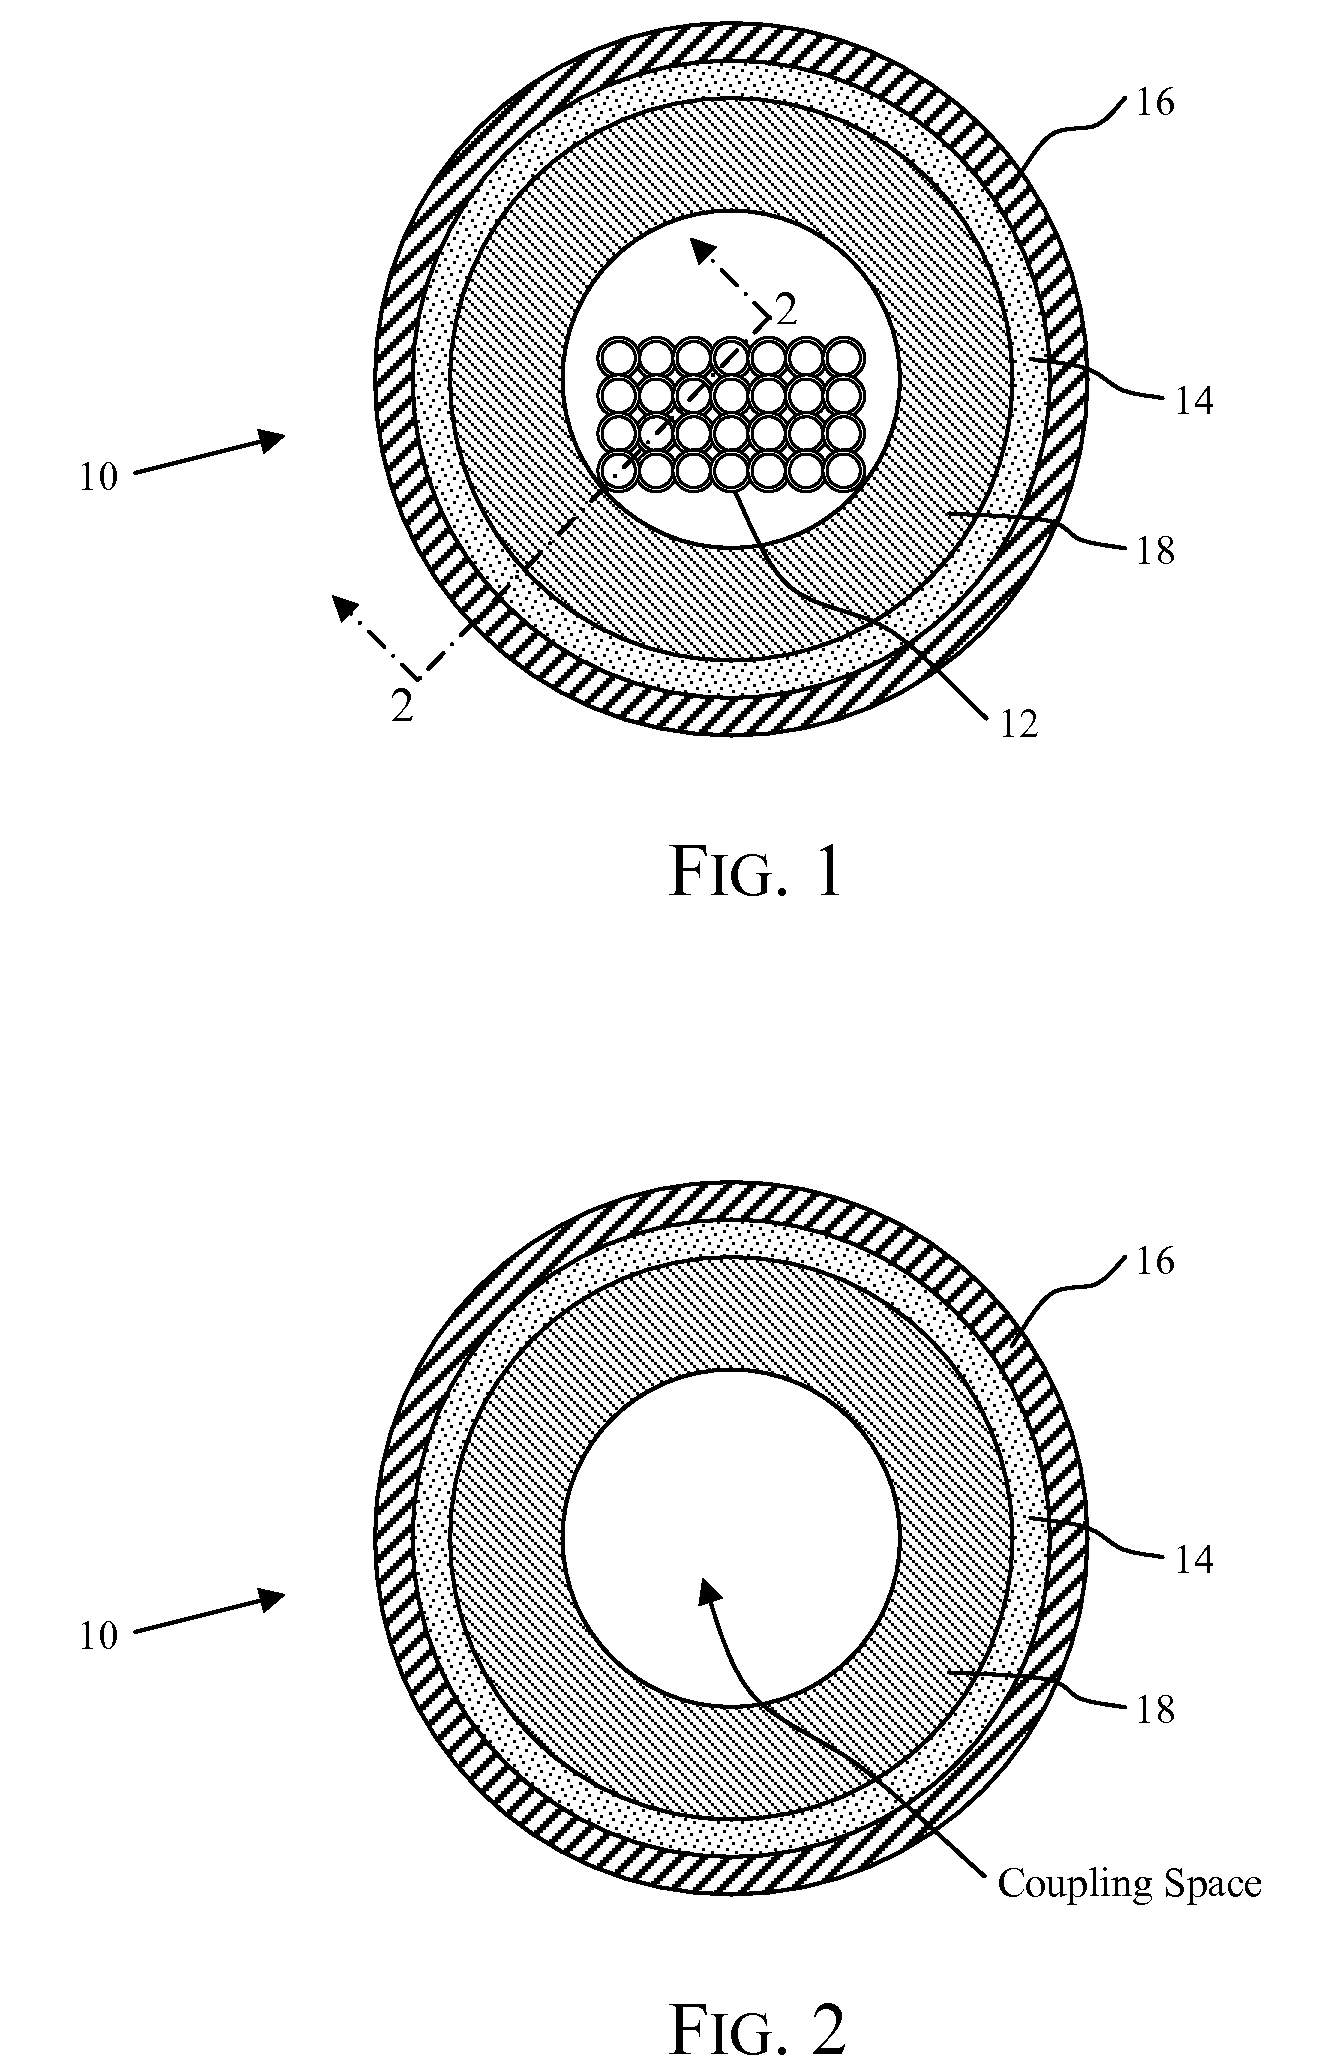 Optical fiber cable having a deformable coupling element